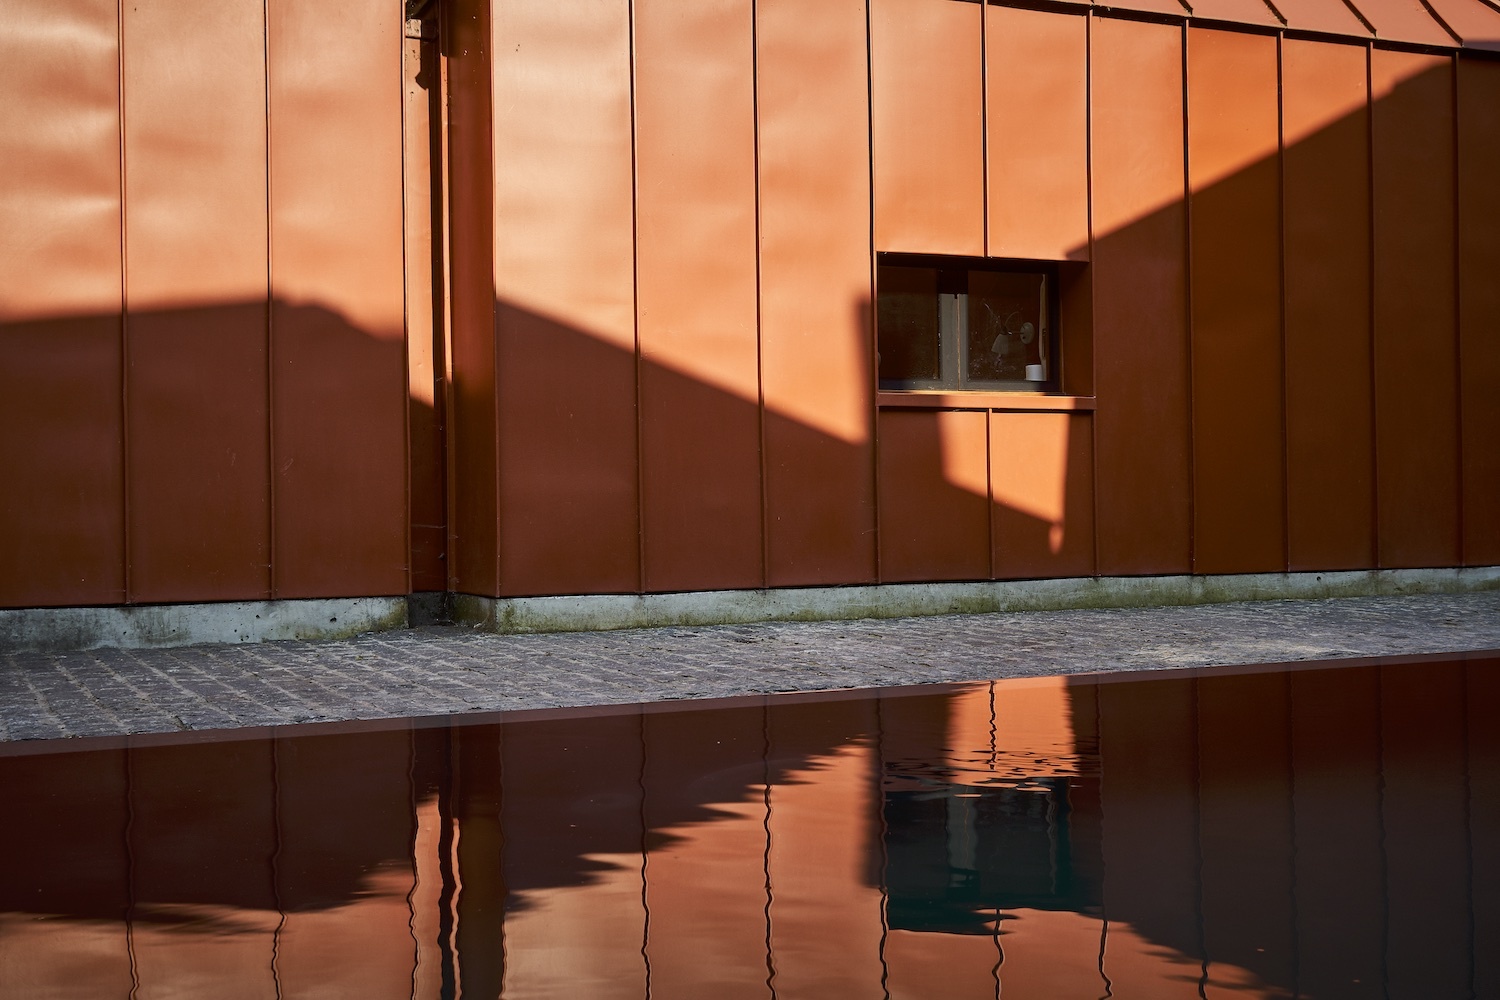 Metallic orange exterior of the house is reflected in the pool